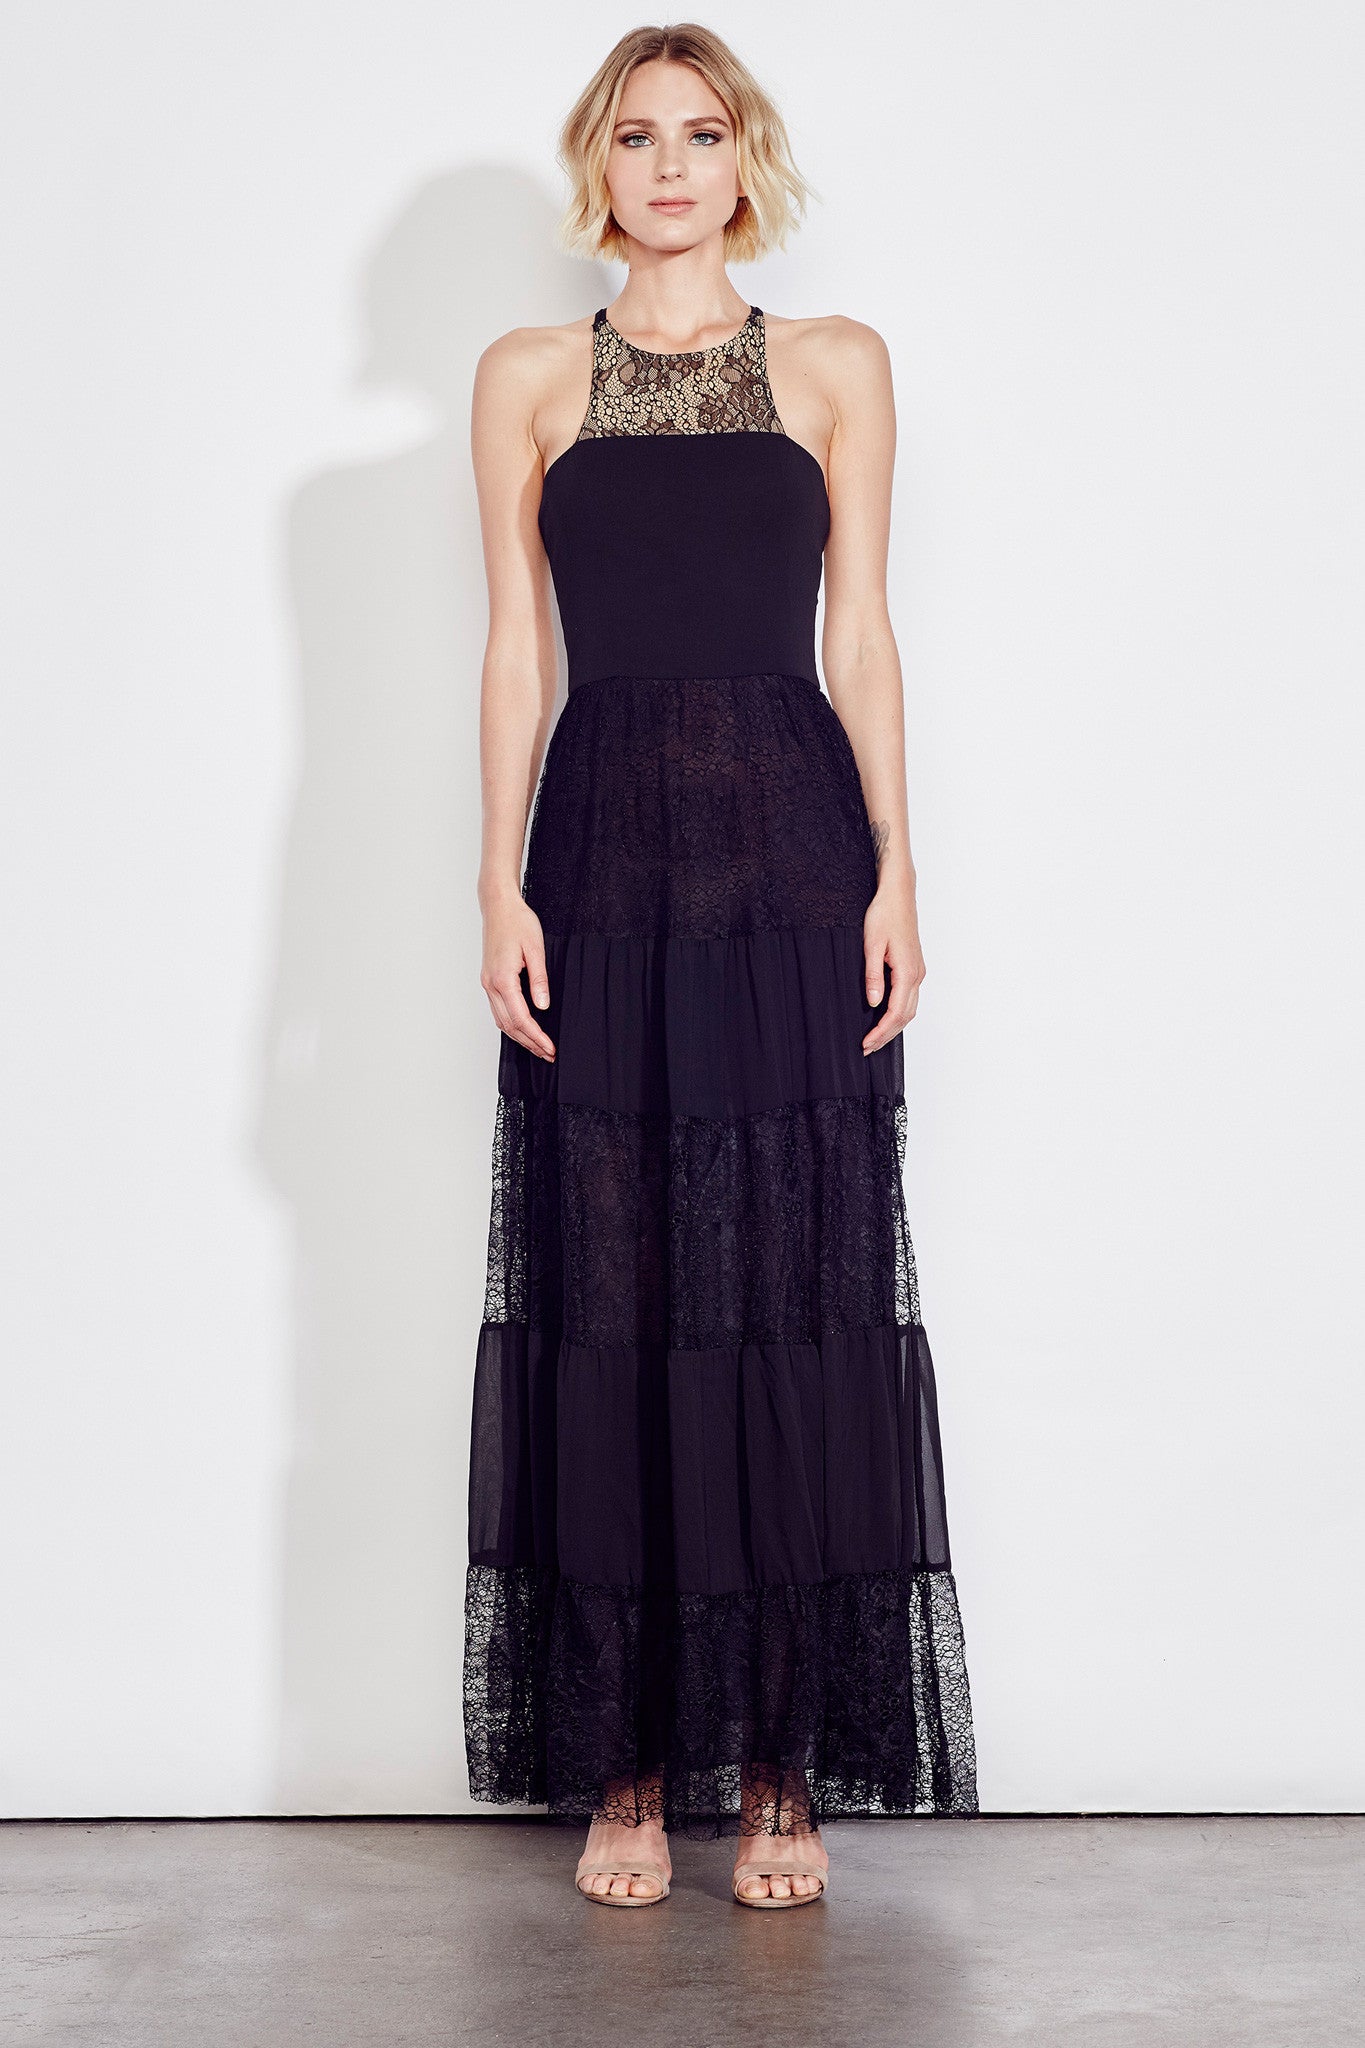 Lace Panel Gown in Black